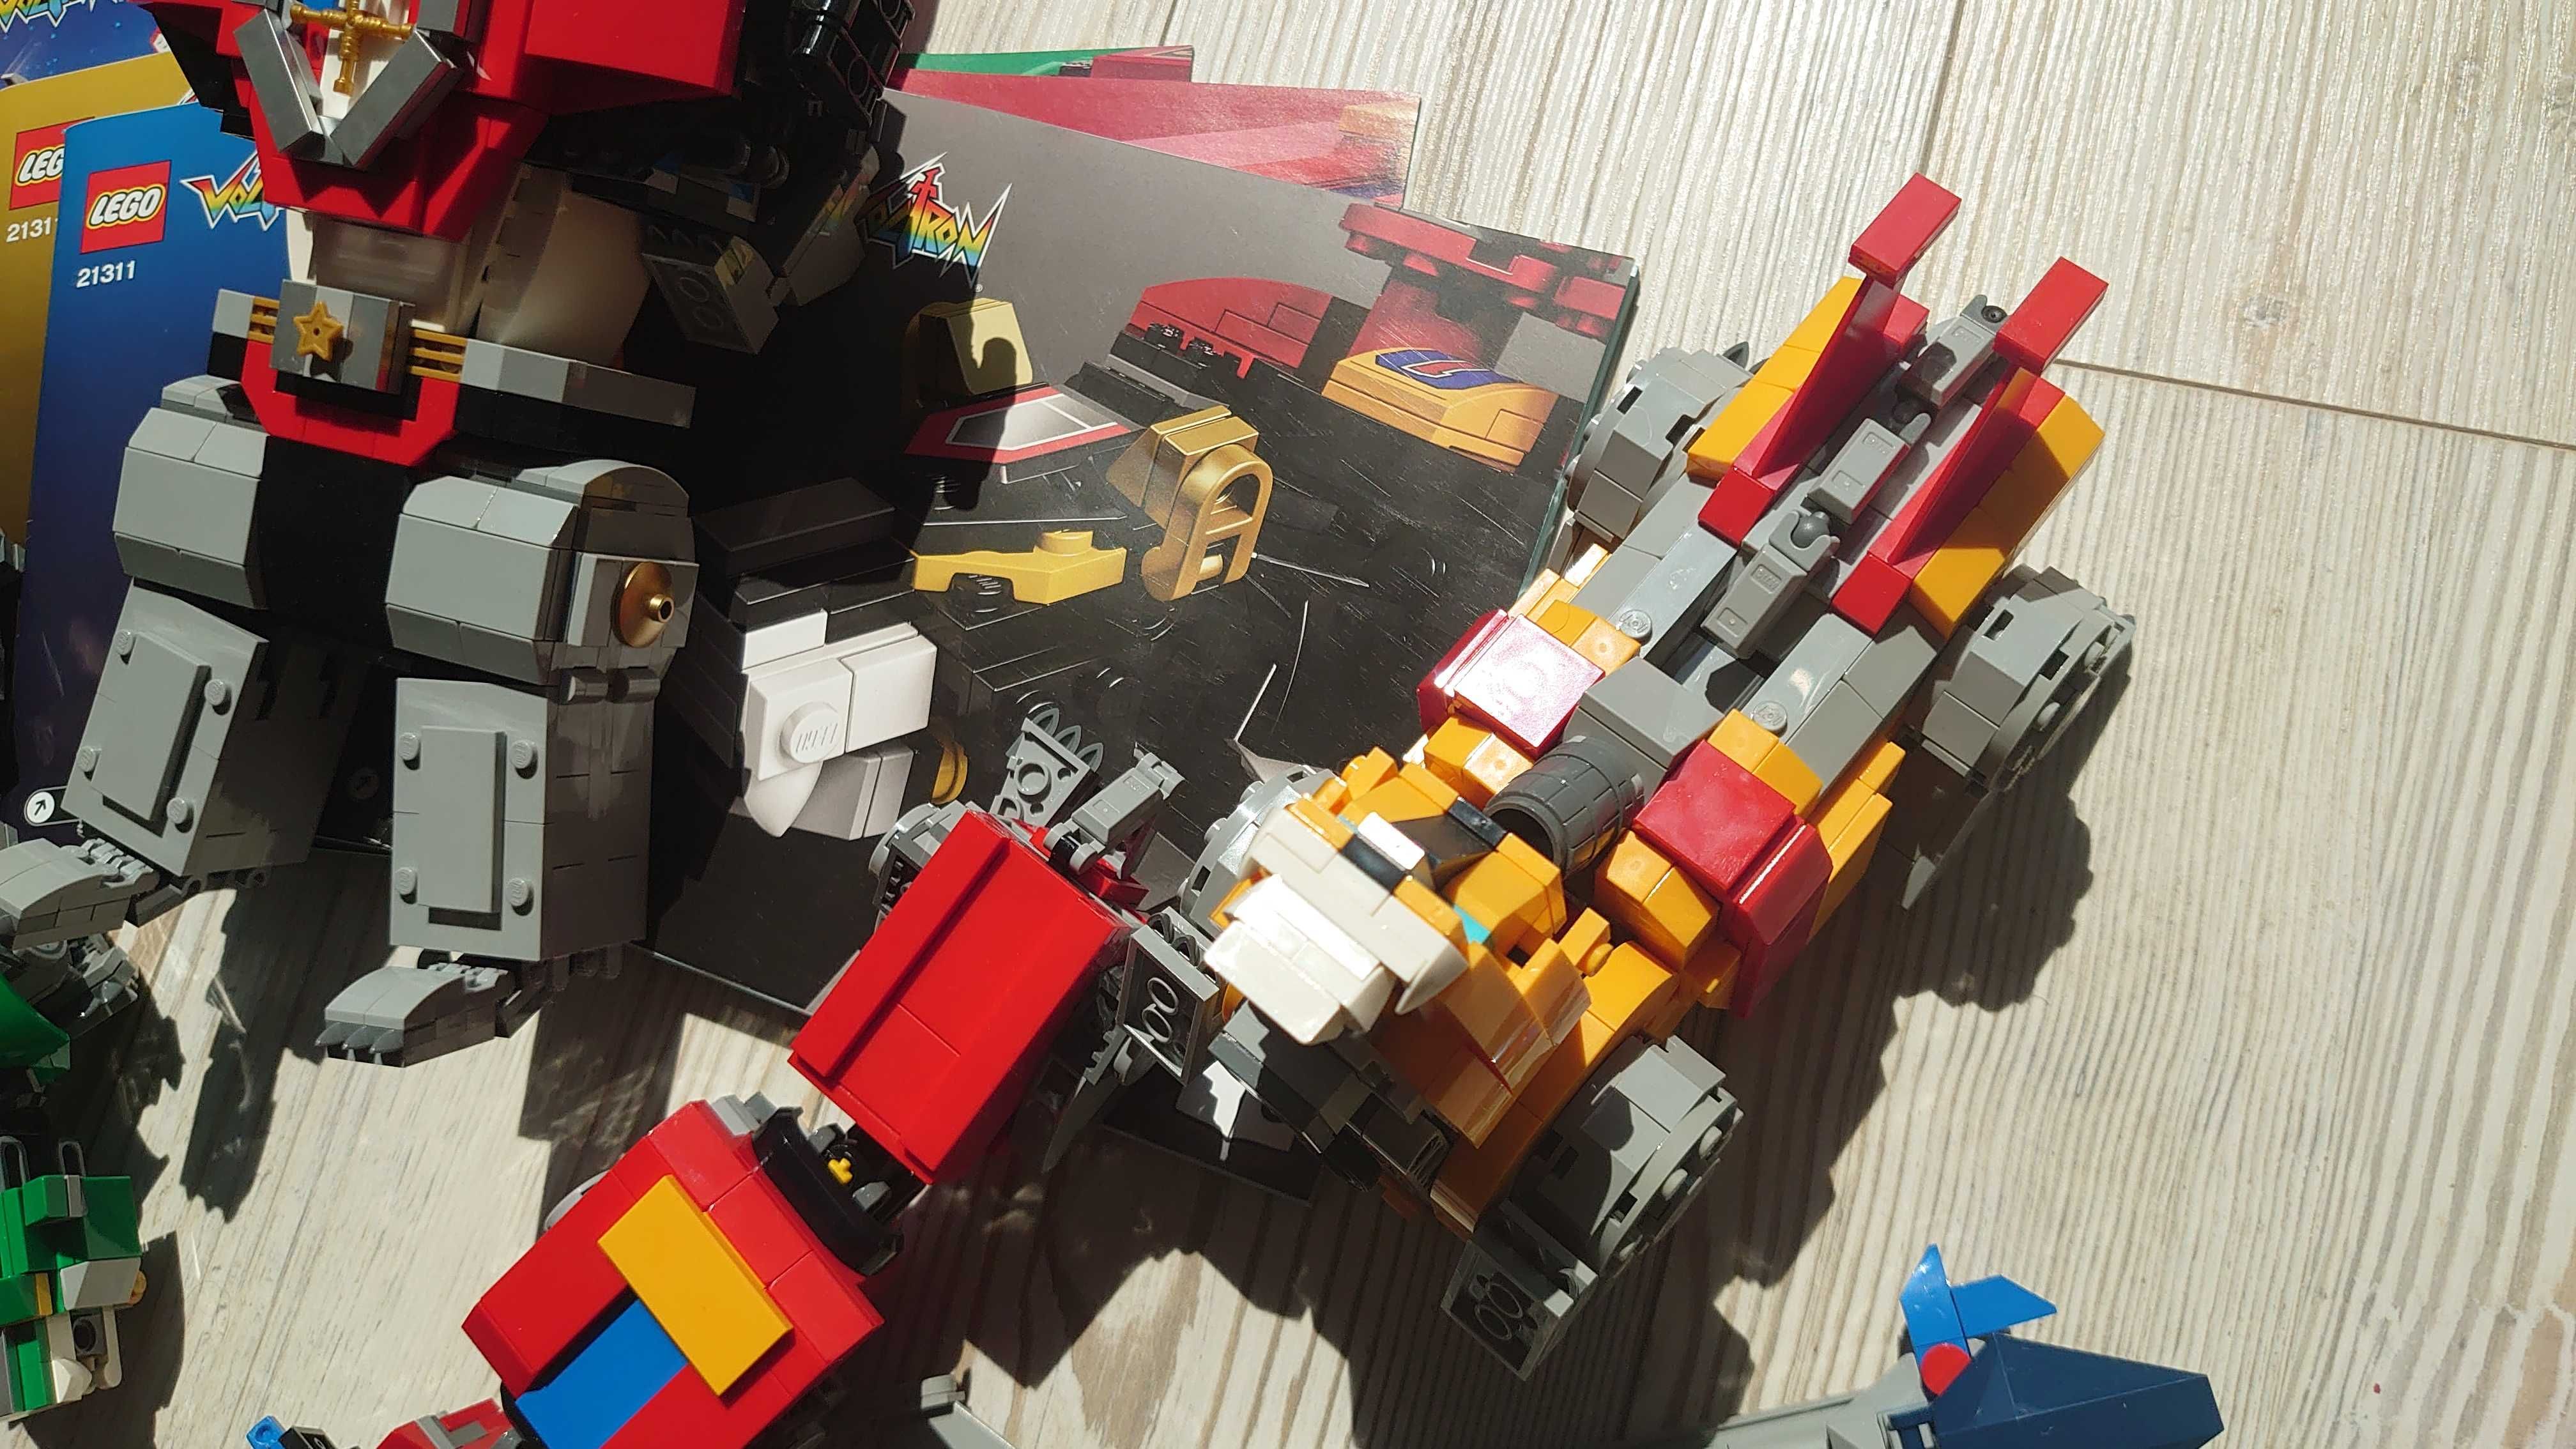 [construit - LIMITED ED.] Lego Ideas 21311 - Voltron 2321 piese 16+